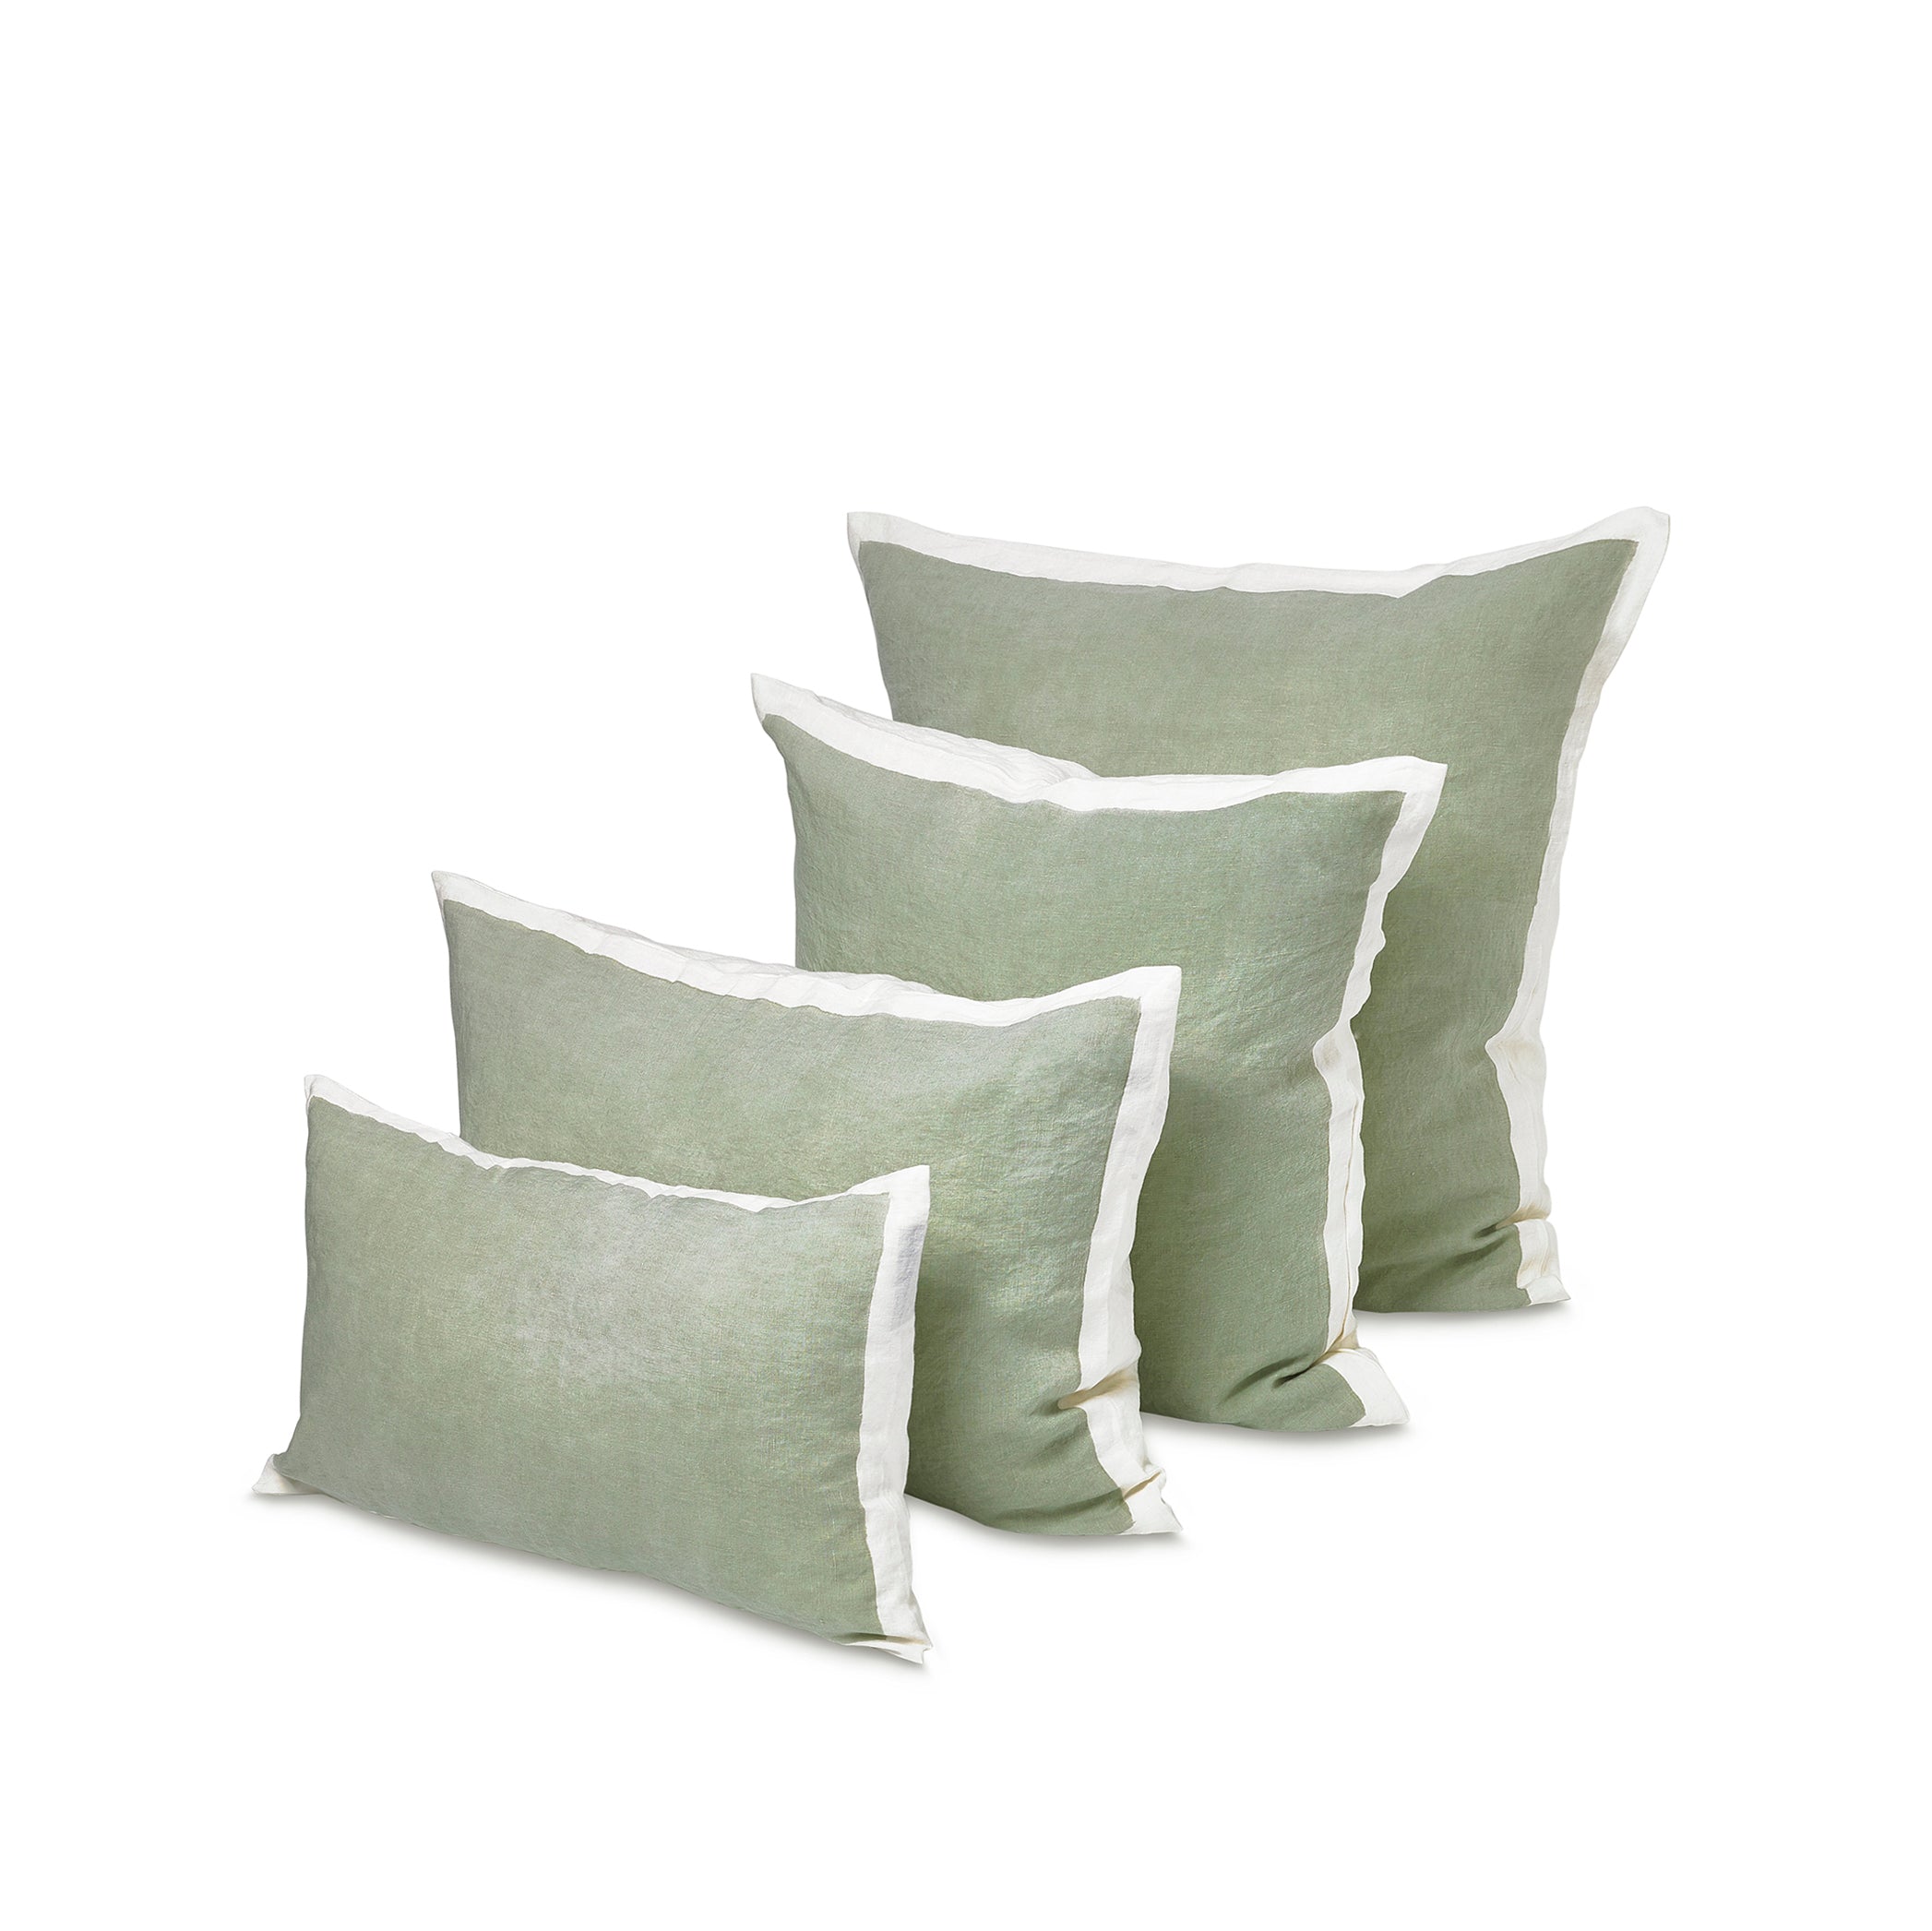 Hand Painted Linen Cushion in Pale Green, 60cm x 40cm